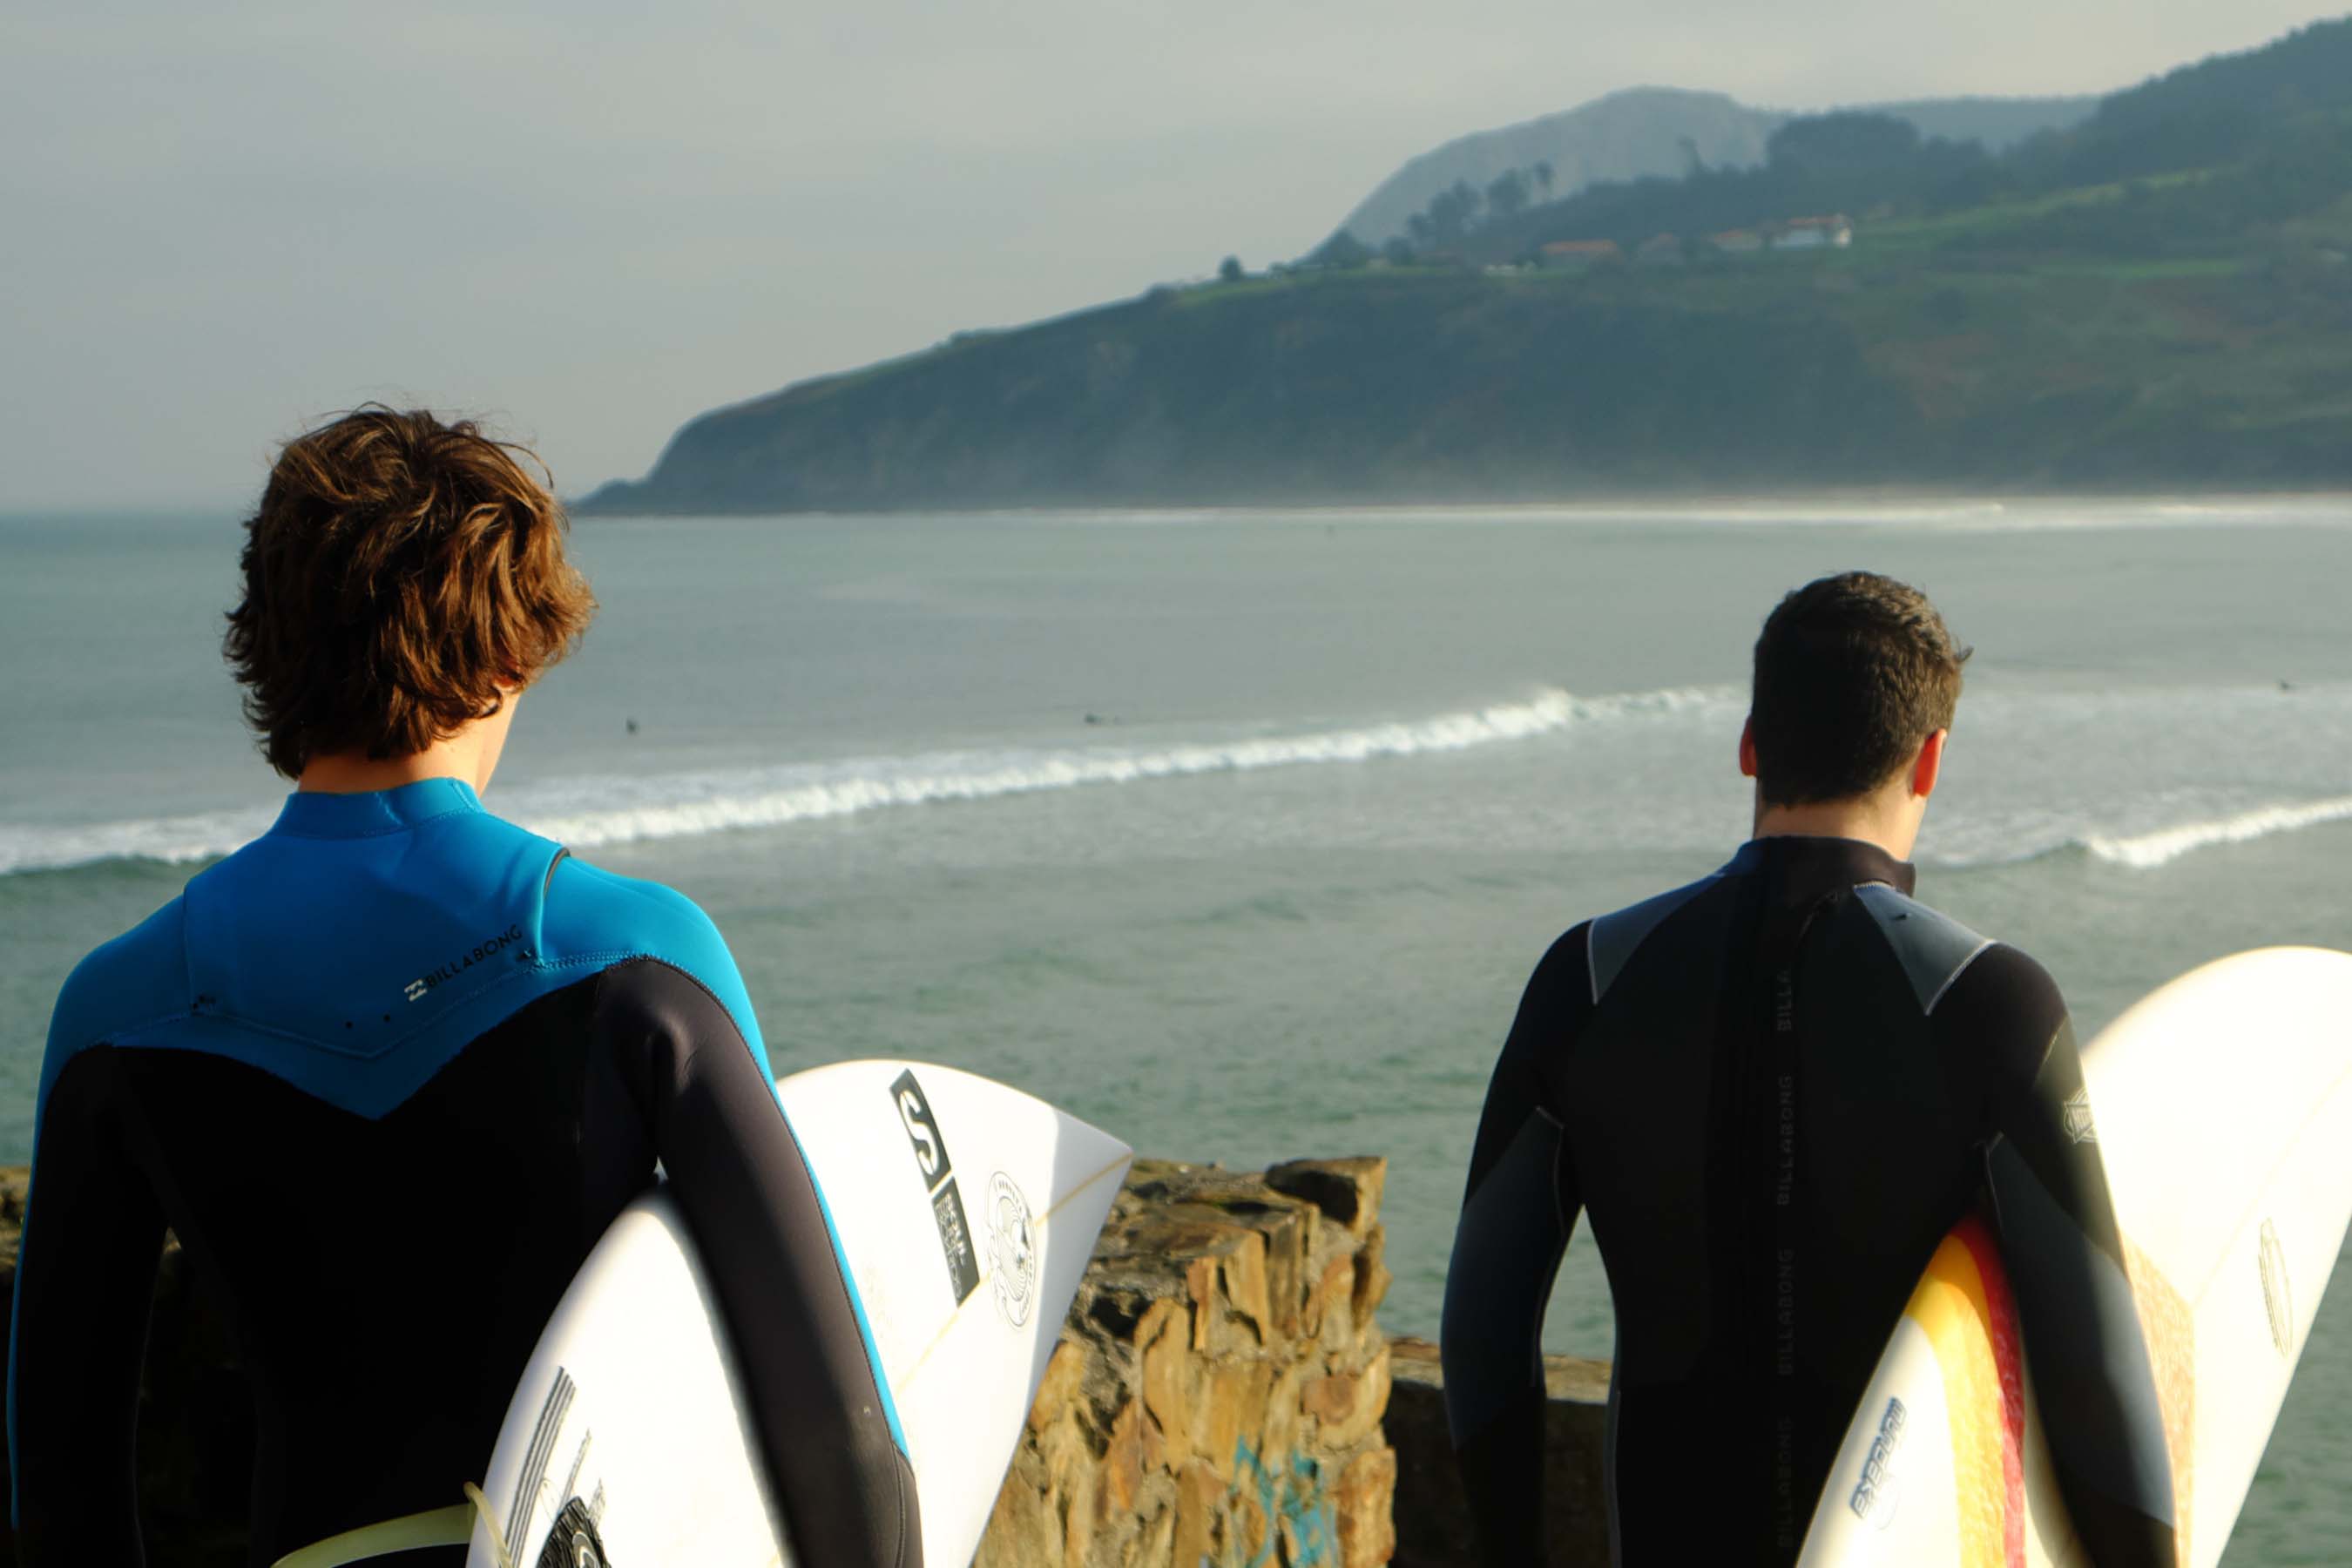 Surfer’s Neck: Causes, Symptoms and Prevention